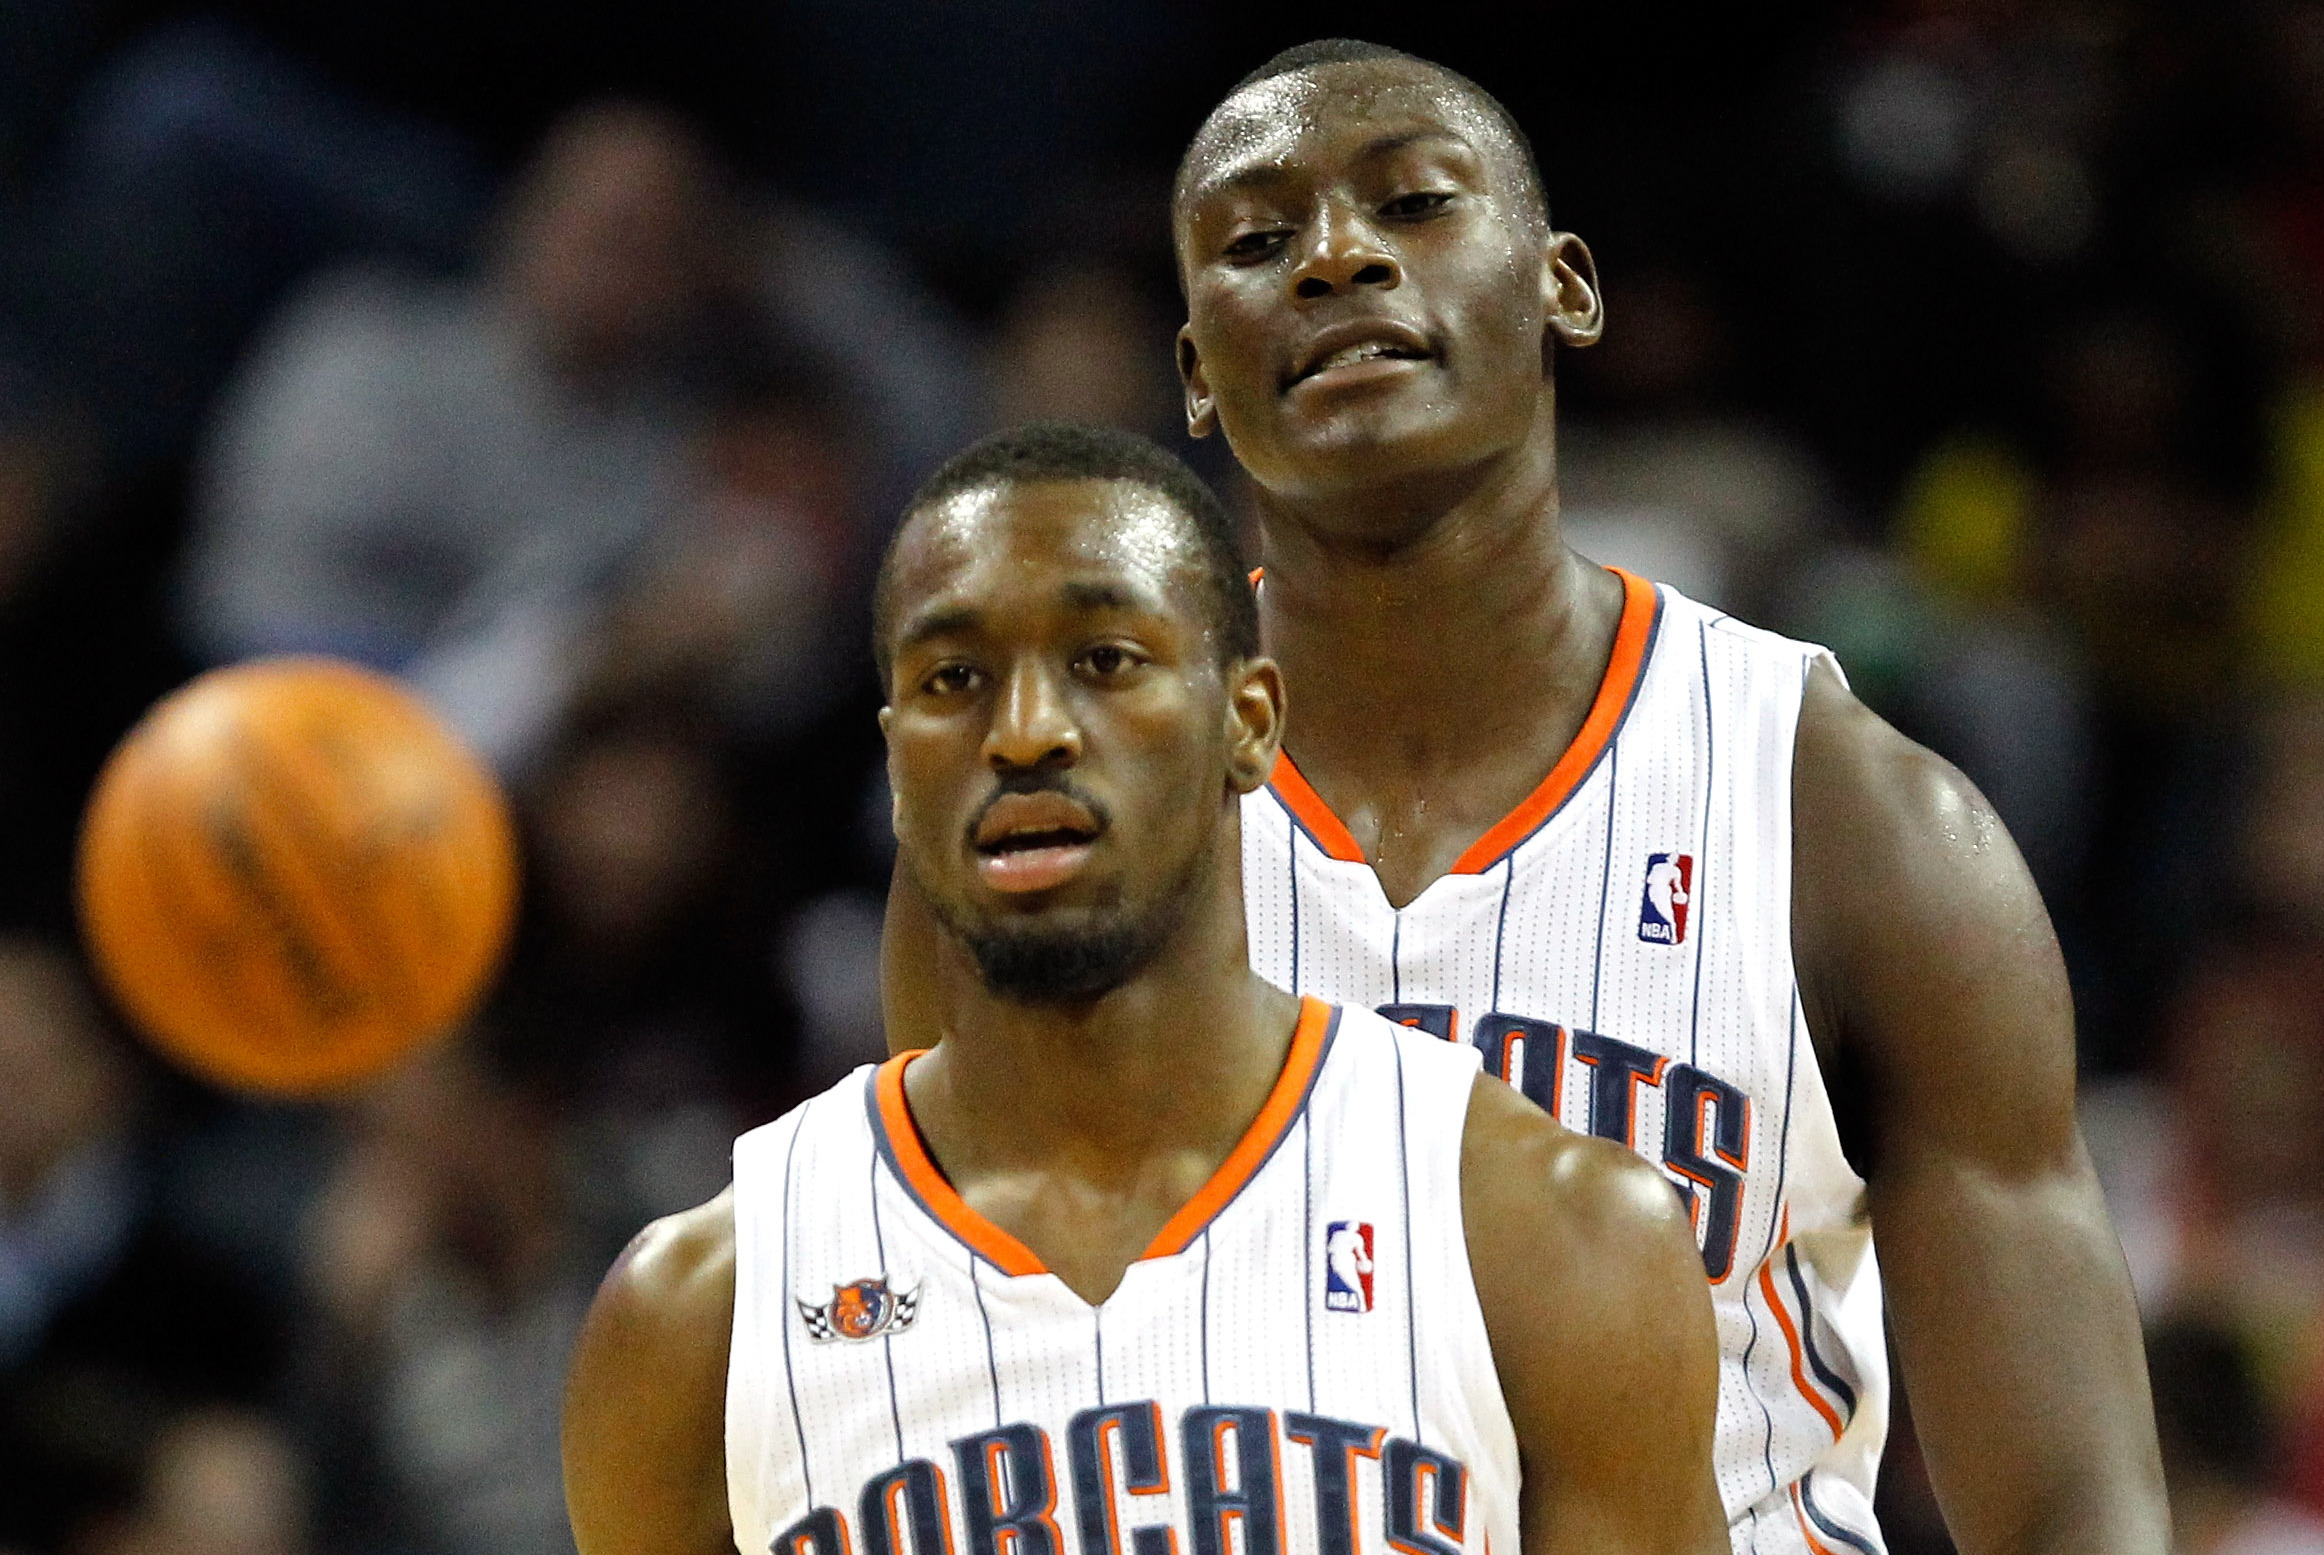 The 10 Worst NBA Teams of This Century - 1. Charlotte Bobcats, 2011-12